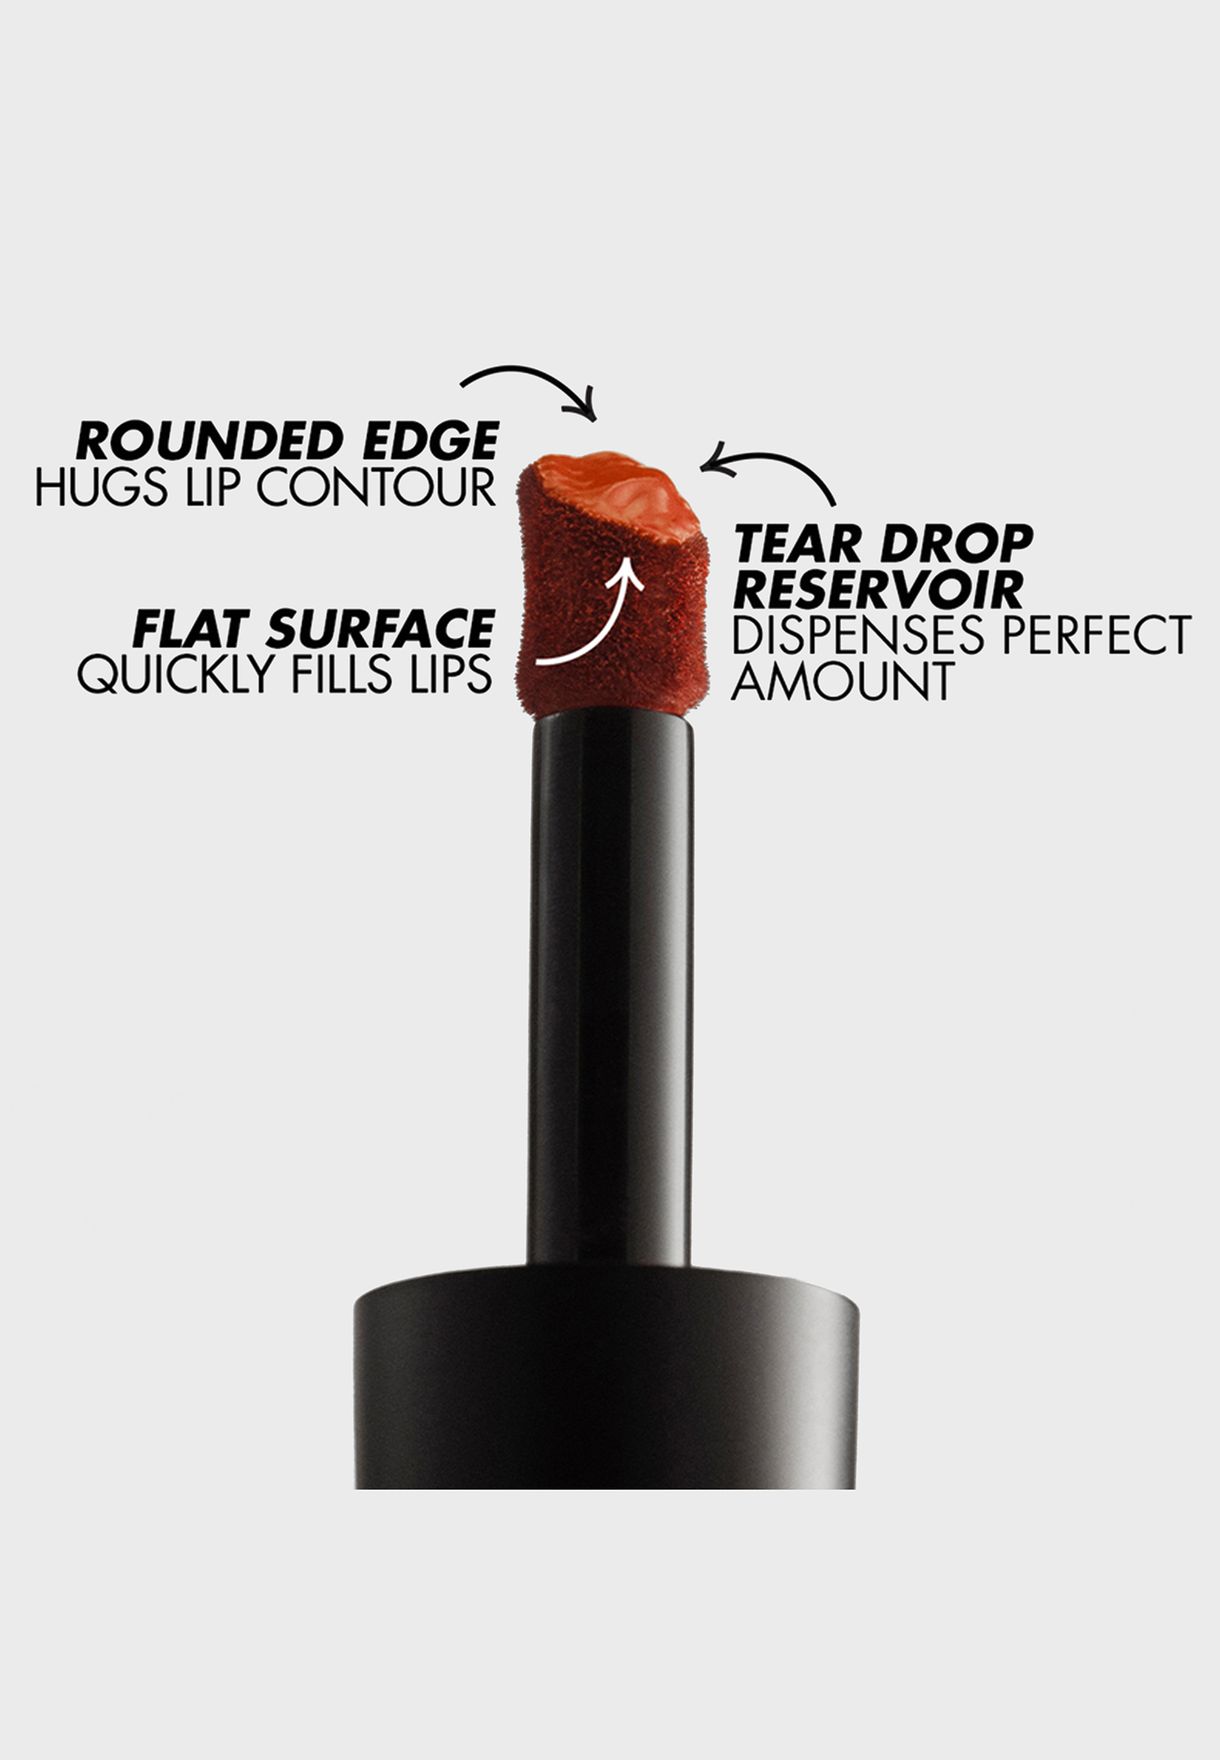 Rouge Artist For Ever Matte Lipstick - 440 - Chili For Life